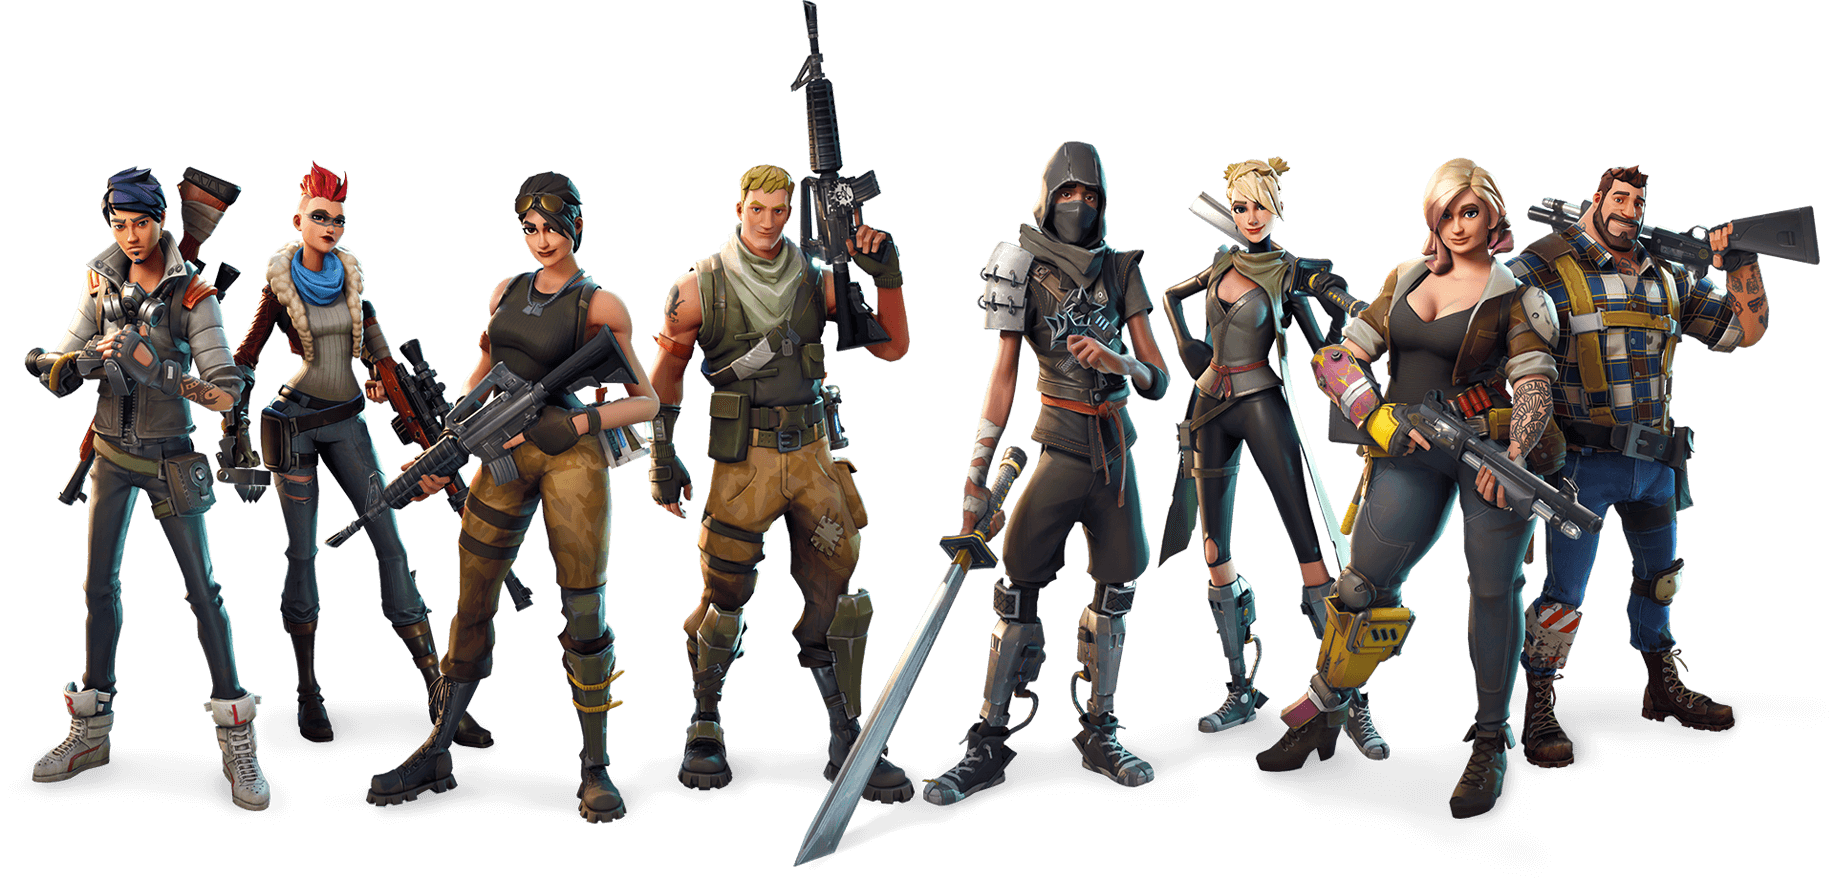 Hero Fortnite Wiki Fandom Powered By Wikia - a class also known as hero is a special group of characters that a player can choose to use during fortnite gameplay classes are broken down into